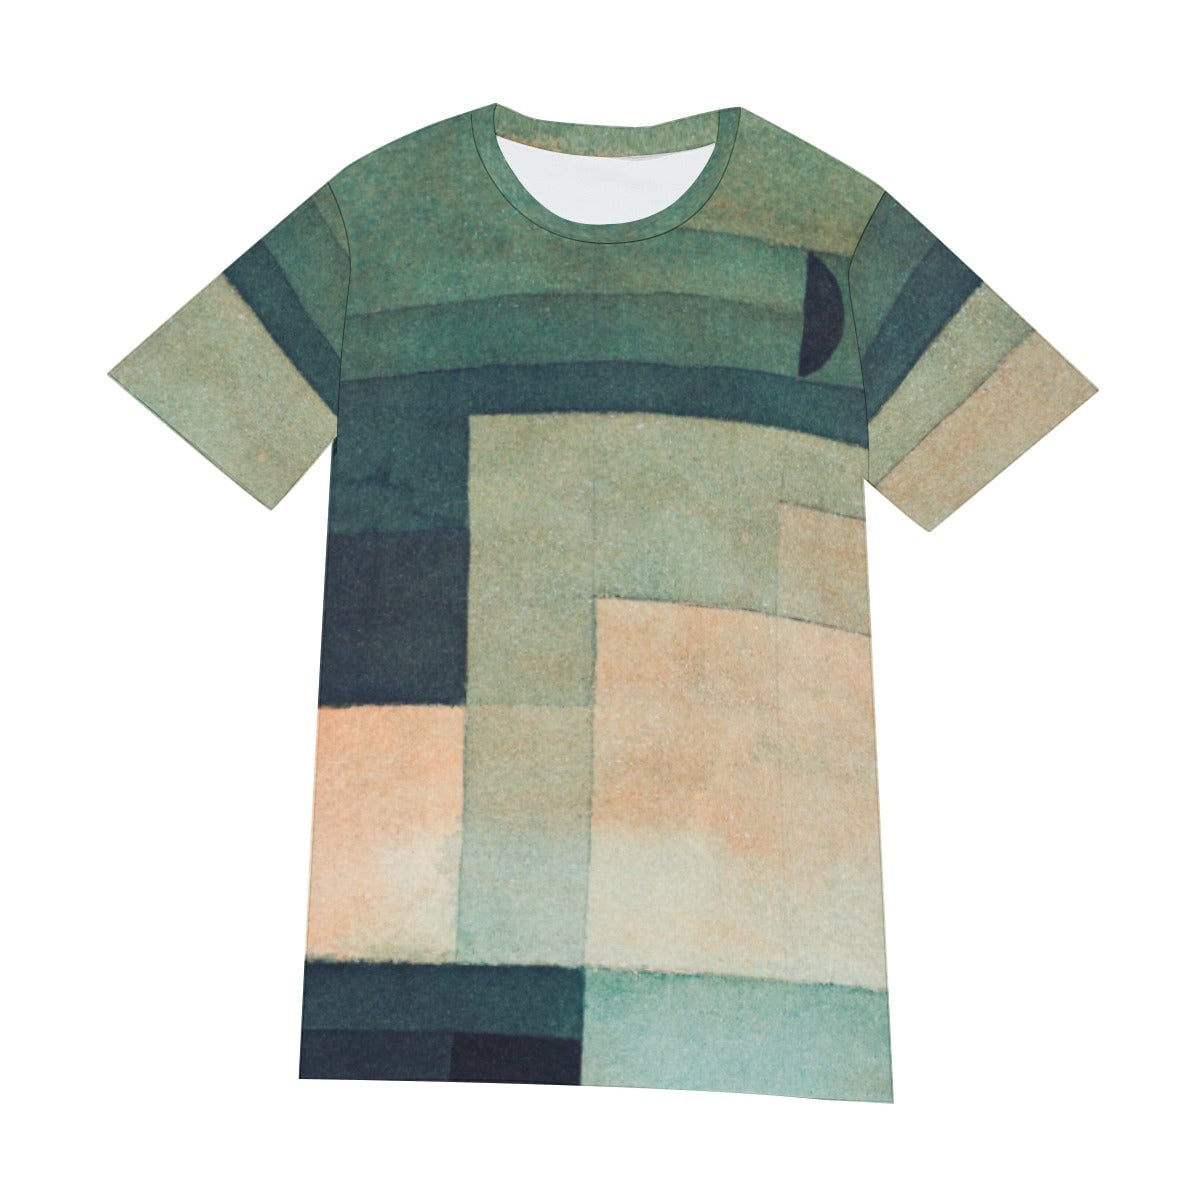 The Firmament Above the Temple Paul Klee T-Shirt